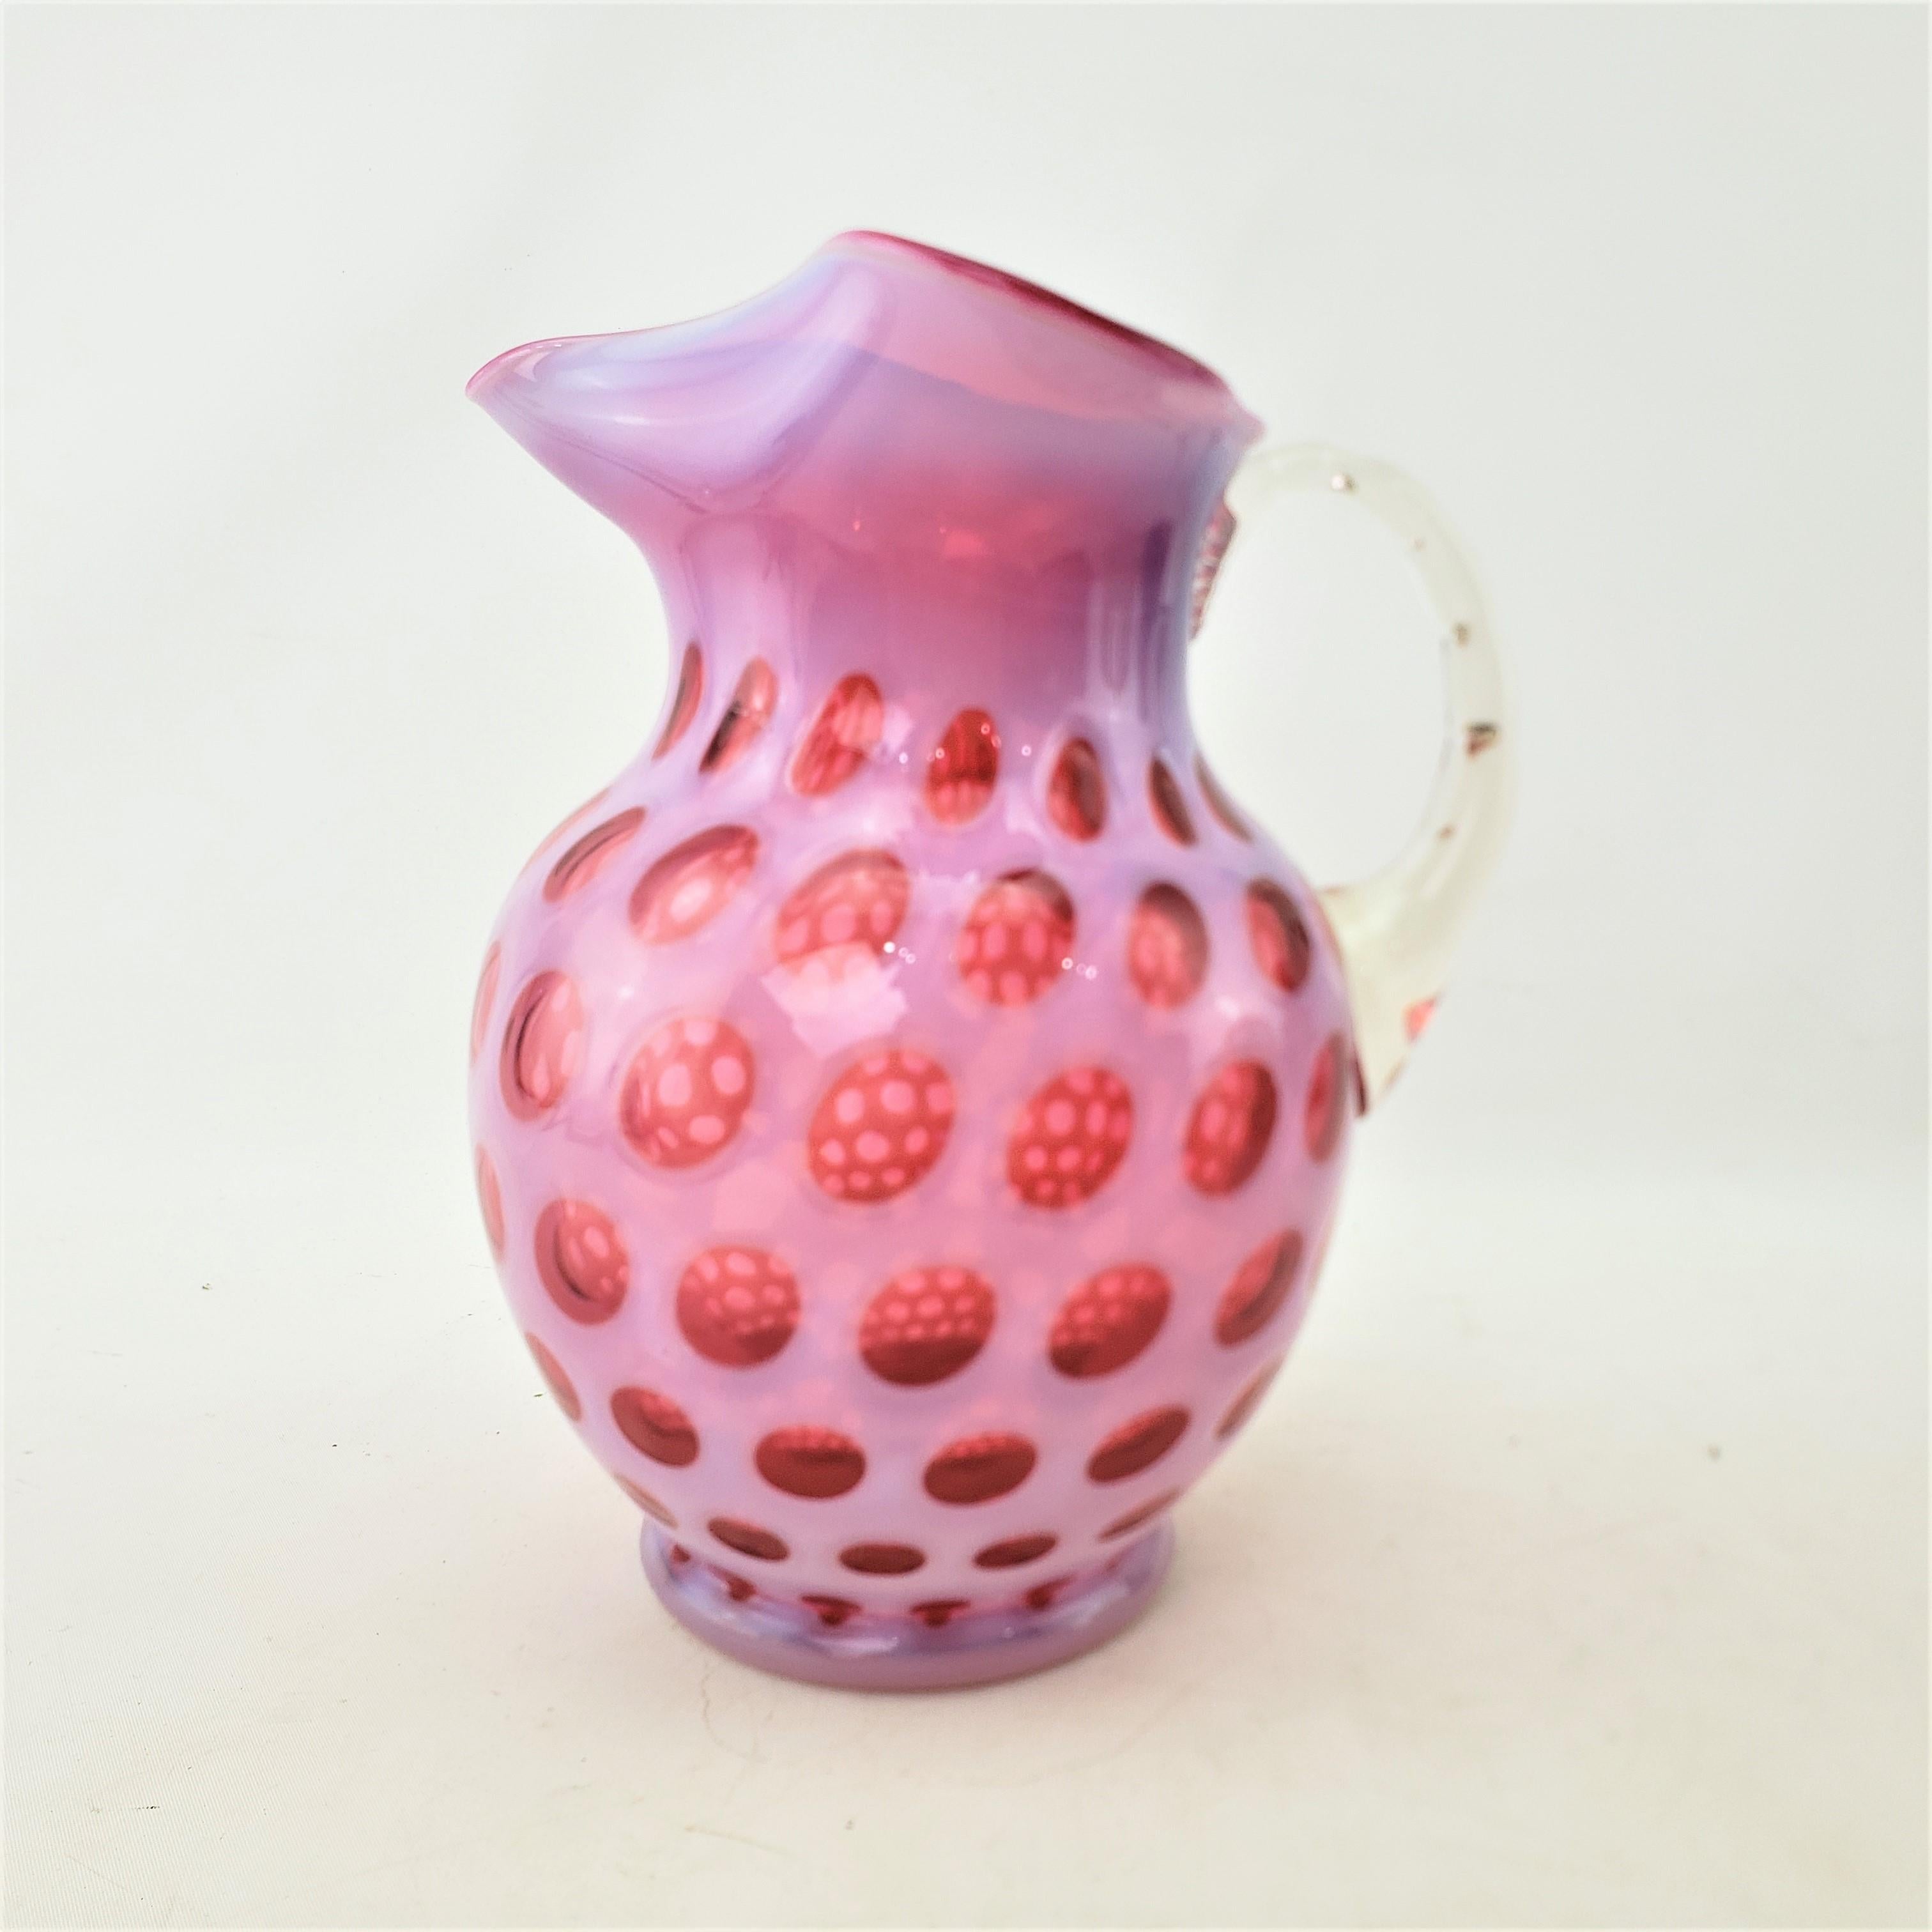 This antique pitcher is unsigned, but presumed to have been made by the Fenton Glass Company of the United States and date to approximately 1900 and done in a Victorian style. The pitcher is composed with a hand-formed cranberry glass base with an